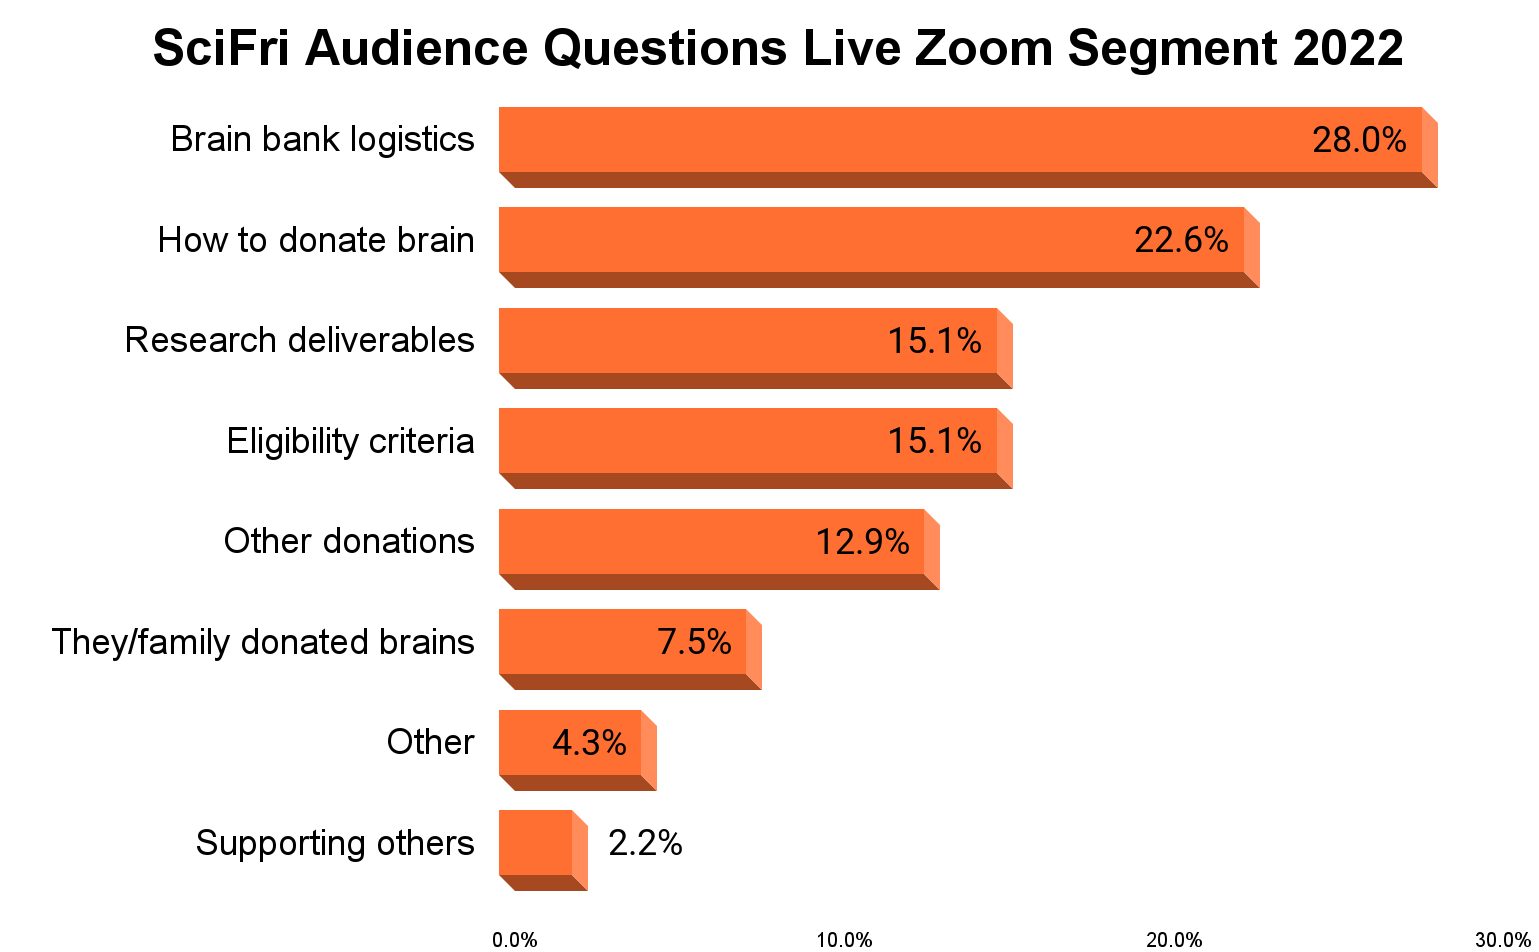 Descending dar graph depicting questions from the live Zoom segment including Brain bank logistics (28.0%), How to donate brain (22.6%), Research deliverables (15.1%), Eligibility criteria (15.1%), Other donations (12.9%), They/family donated brains(7.5%), Other (4.3% ), Supporting others(2.2%)